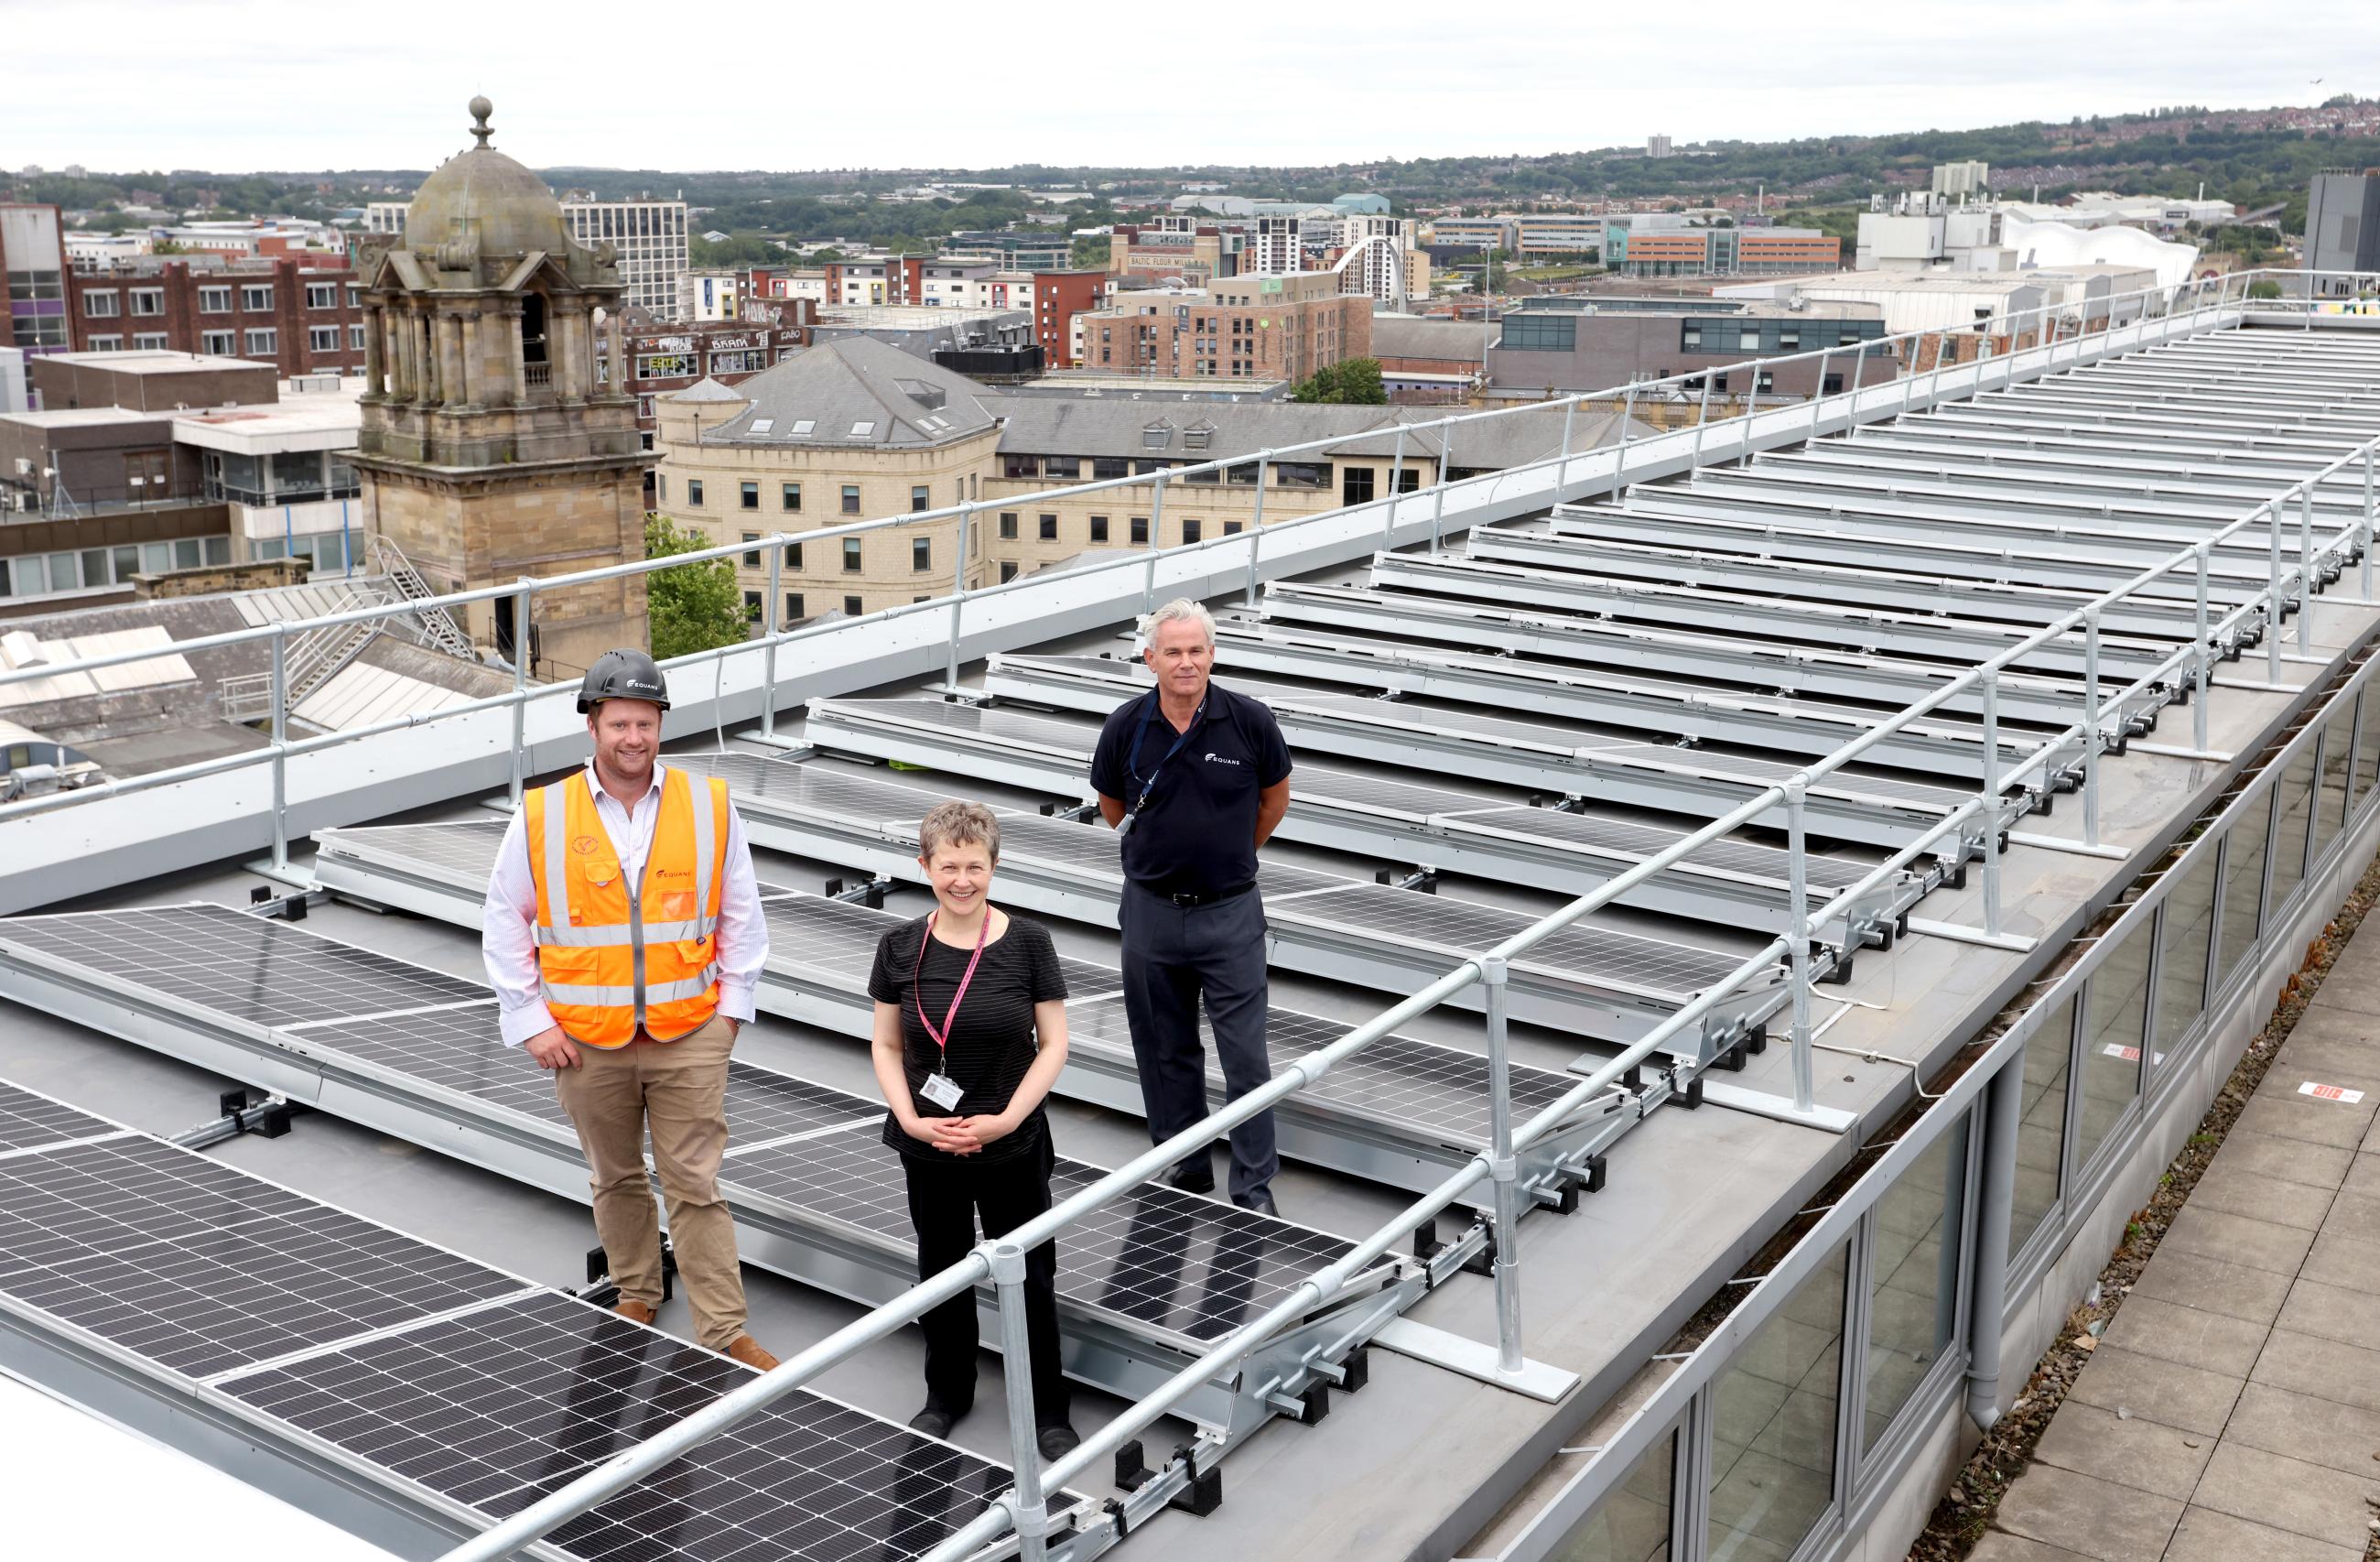 Joe Logan, Construction Manager at EQUANS; Cllr Jane Byrne, Newcastle City Council’s Connected City Cabinet member and Tim Wood, Director of Sustainability & Innovation at EQUANS on the roof of Newcastle City Library